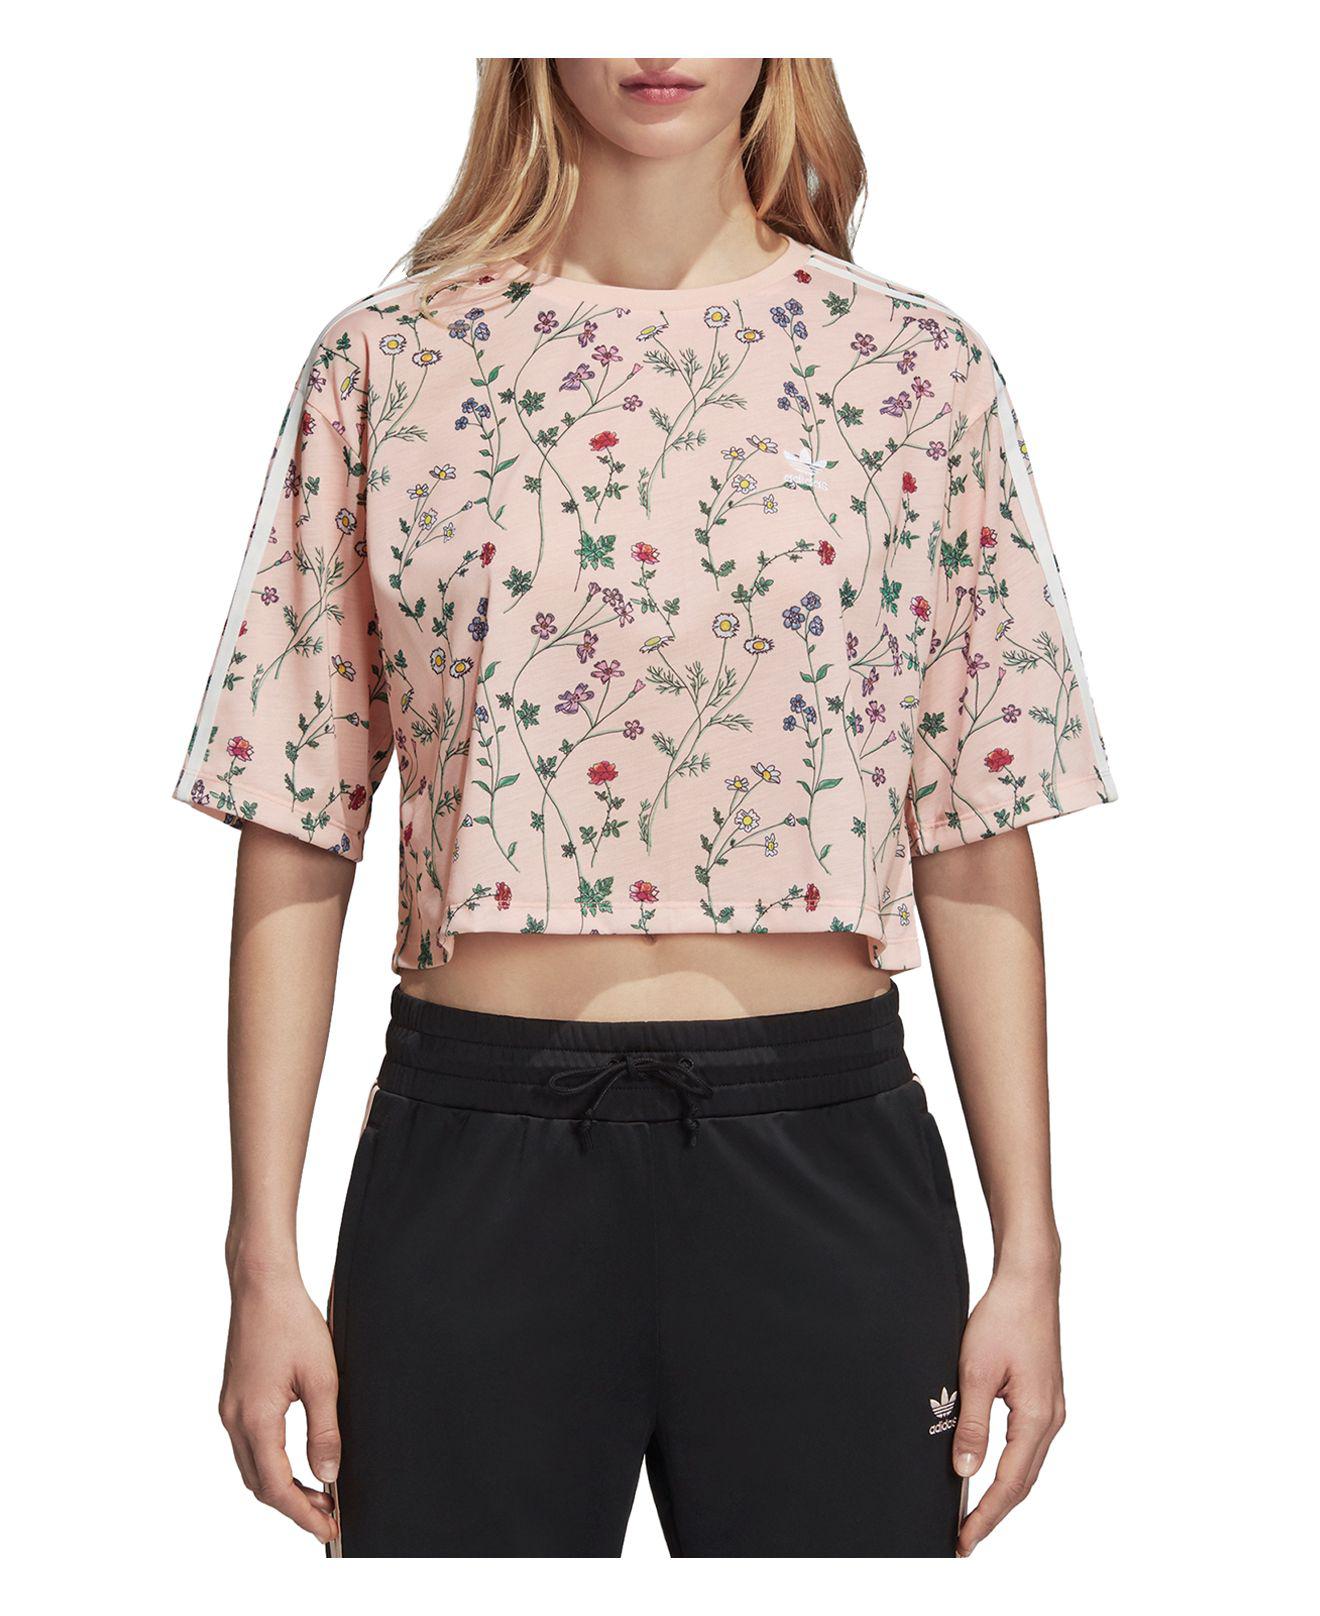 adidas Originals Floral Print Cropped Tee in Pink | Lyst